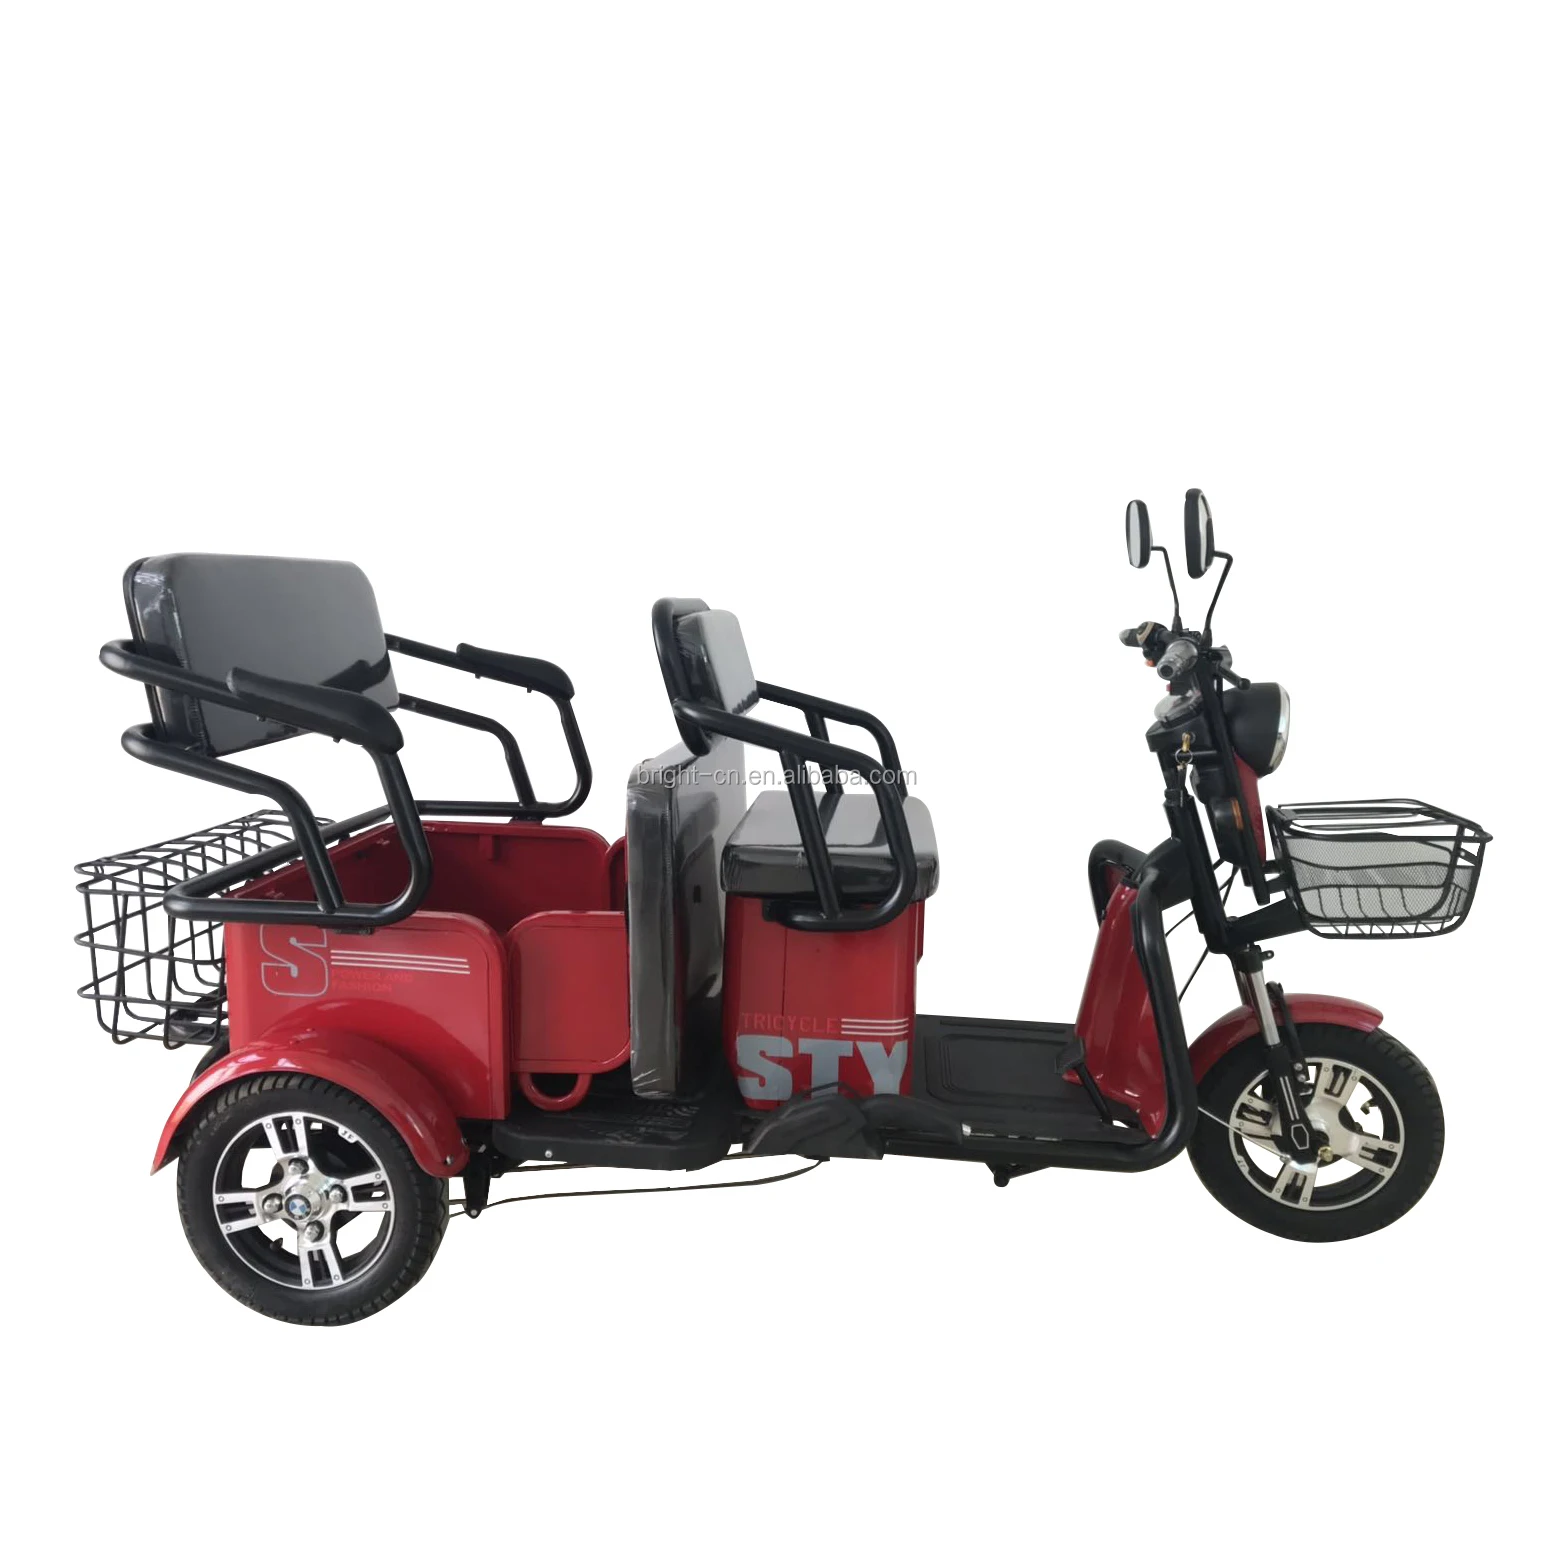 three wheel cycles for sale